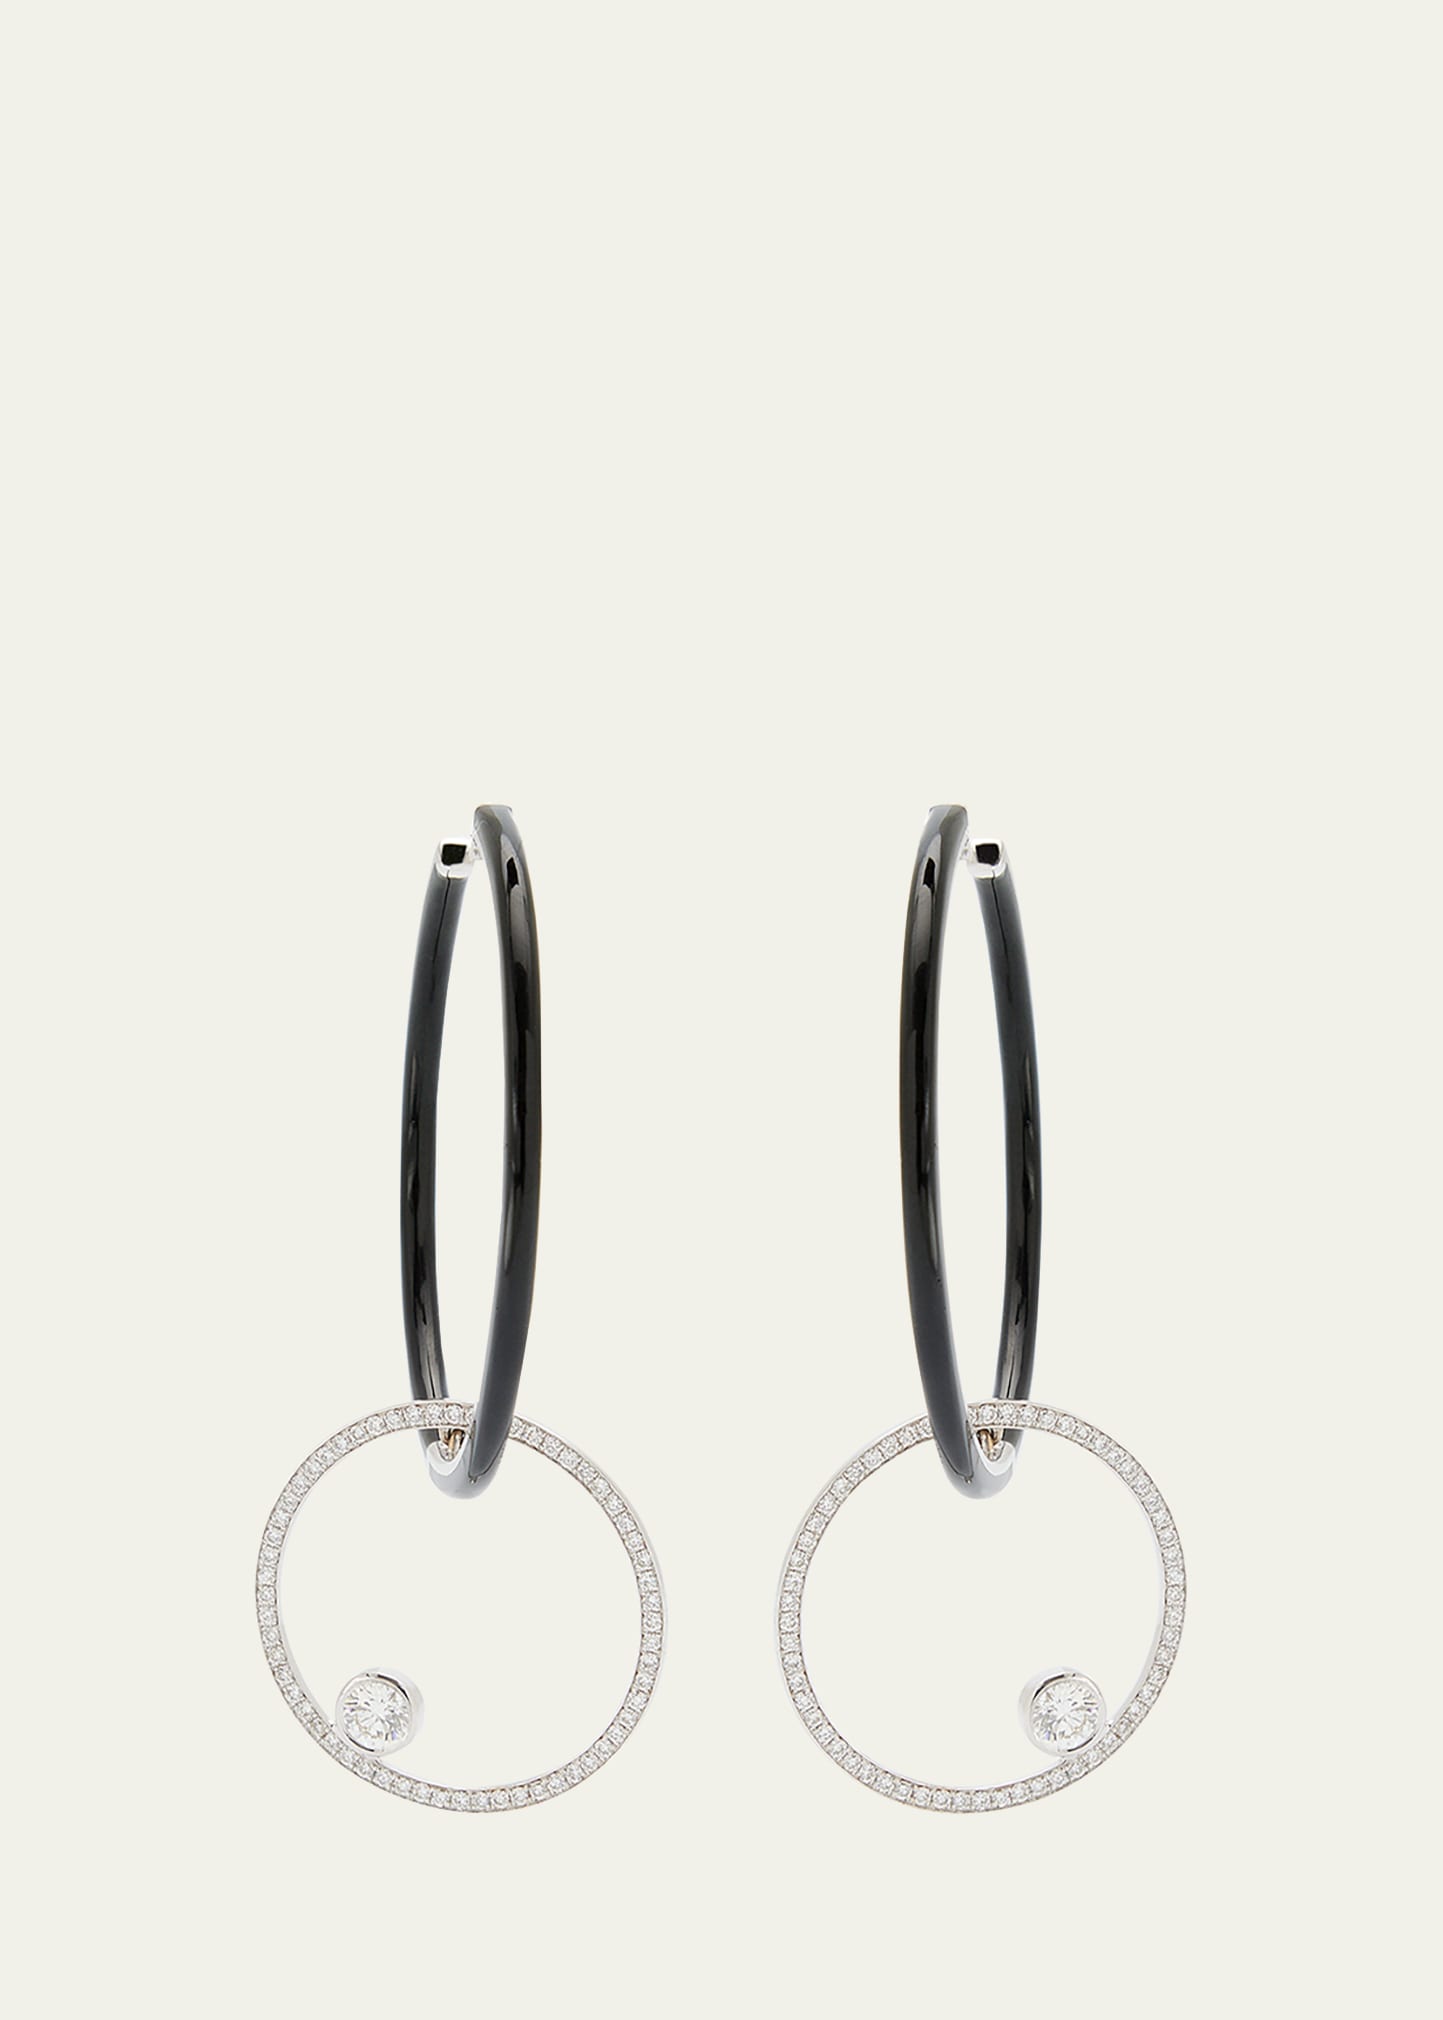 Oui Black Enamel Hoop Earrings with Pave Ring and Round Diamonds